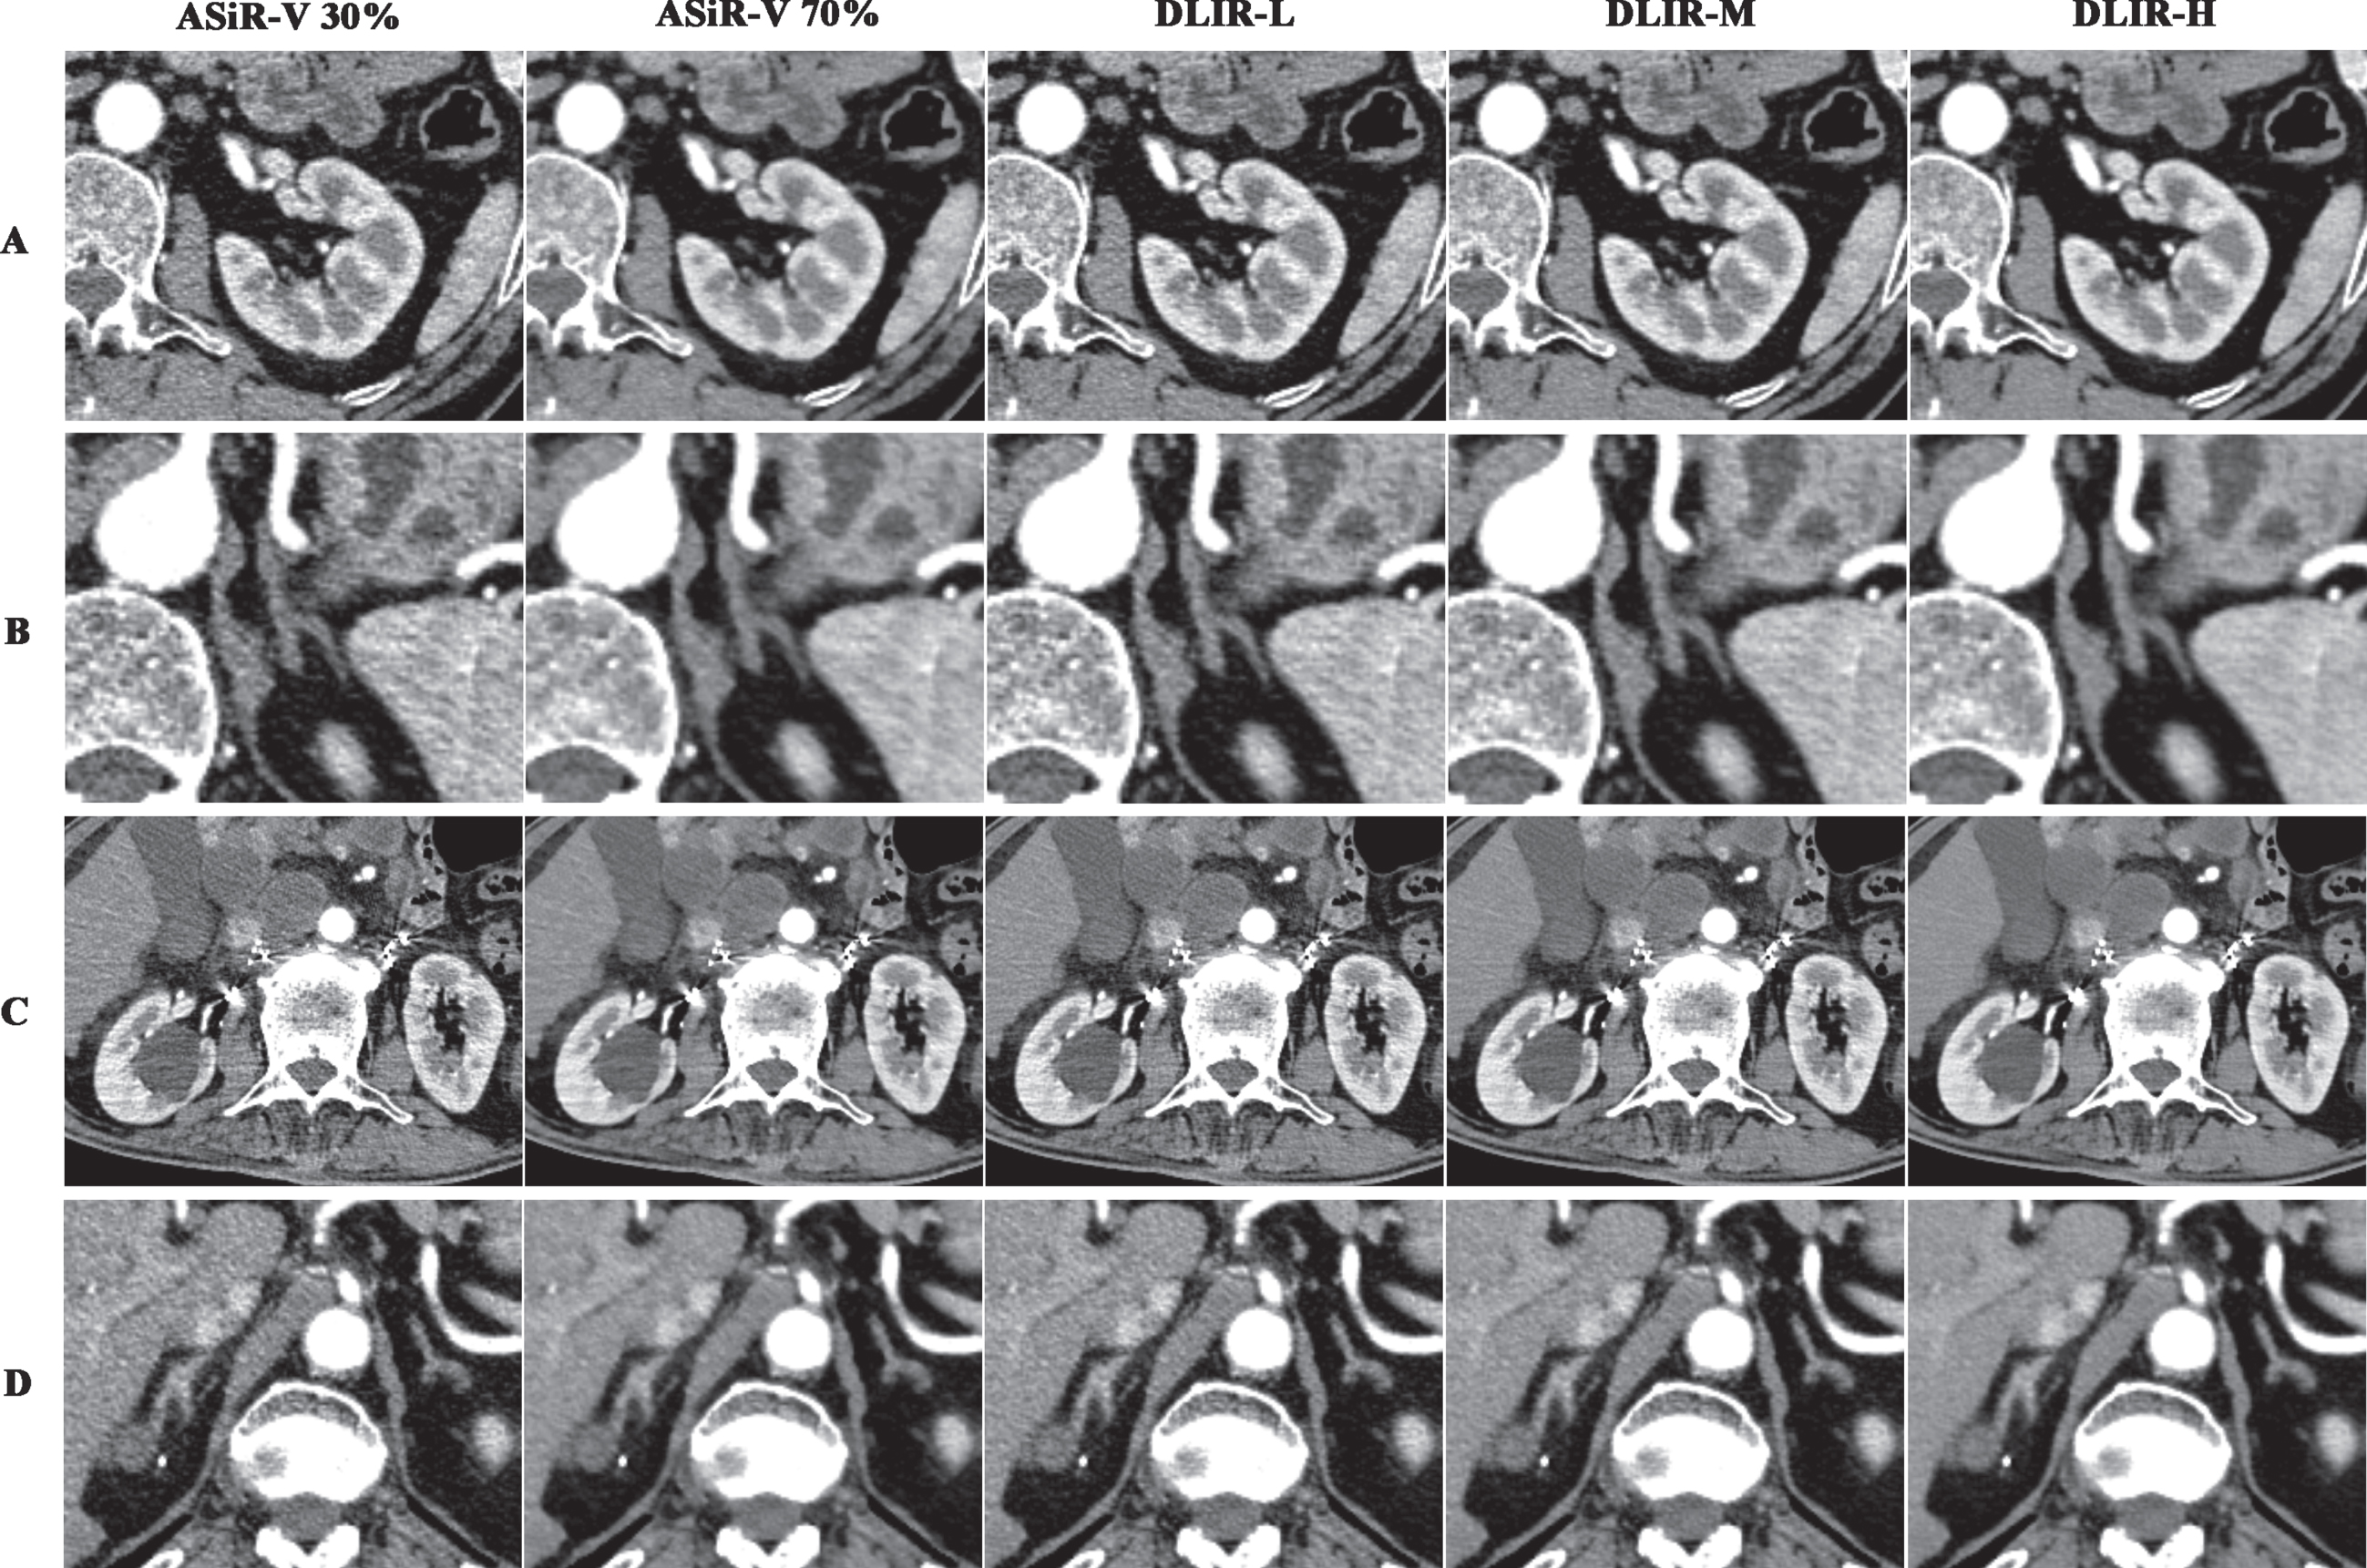 Image quality comparison of ASiR-V 30%, ASiR-V 70%, DLIR-L, DLIR-M, and DLIR-H. Images were compared between all of the reconstruction datasets in contrast-enhanced renal and adrenal CT (A) (B). ASiR-V 70% showed similar subjective image appearances and objective values to DLIR-H and DLIR-M. However, DLIR images yielded better visual appearances even in some cases with high noise and artifact, as well as in some cases with small lesions. A case showed severe radial and stripy artifacts after the interventional therapy in adrenal glands. Additionally, several renal cysts showed. DLIR images showed a better denoise effect and depiction of lesions. (C). Another case showed a small and low-attenuation lesion in the right adrenal gland which was close to the hepatis. The boundary between them was better differentiated in DLIR images (D).